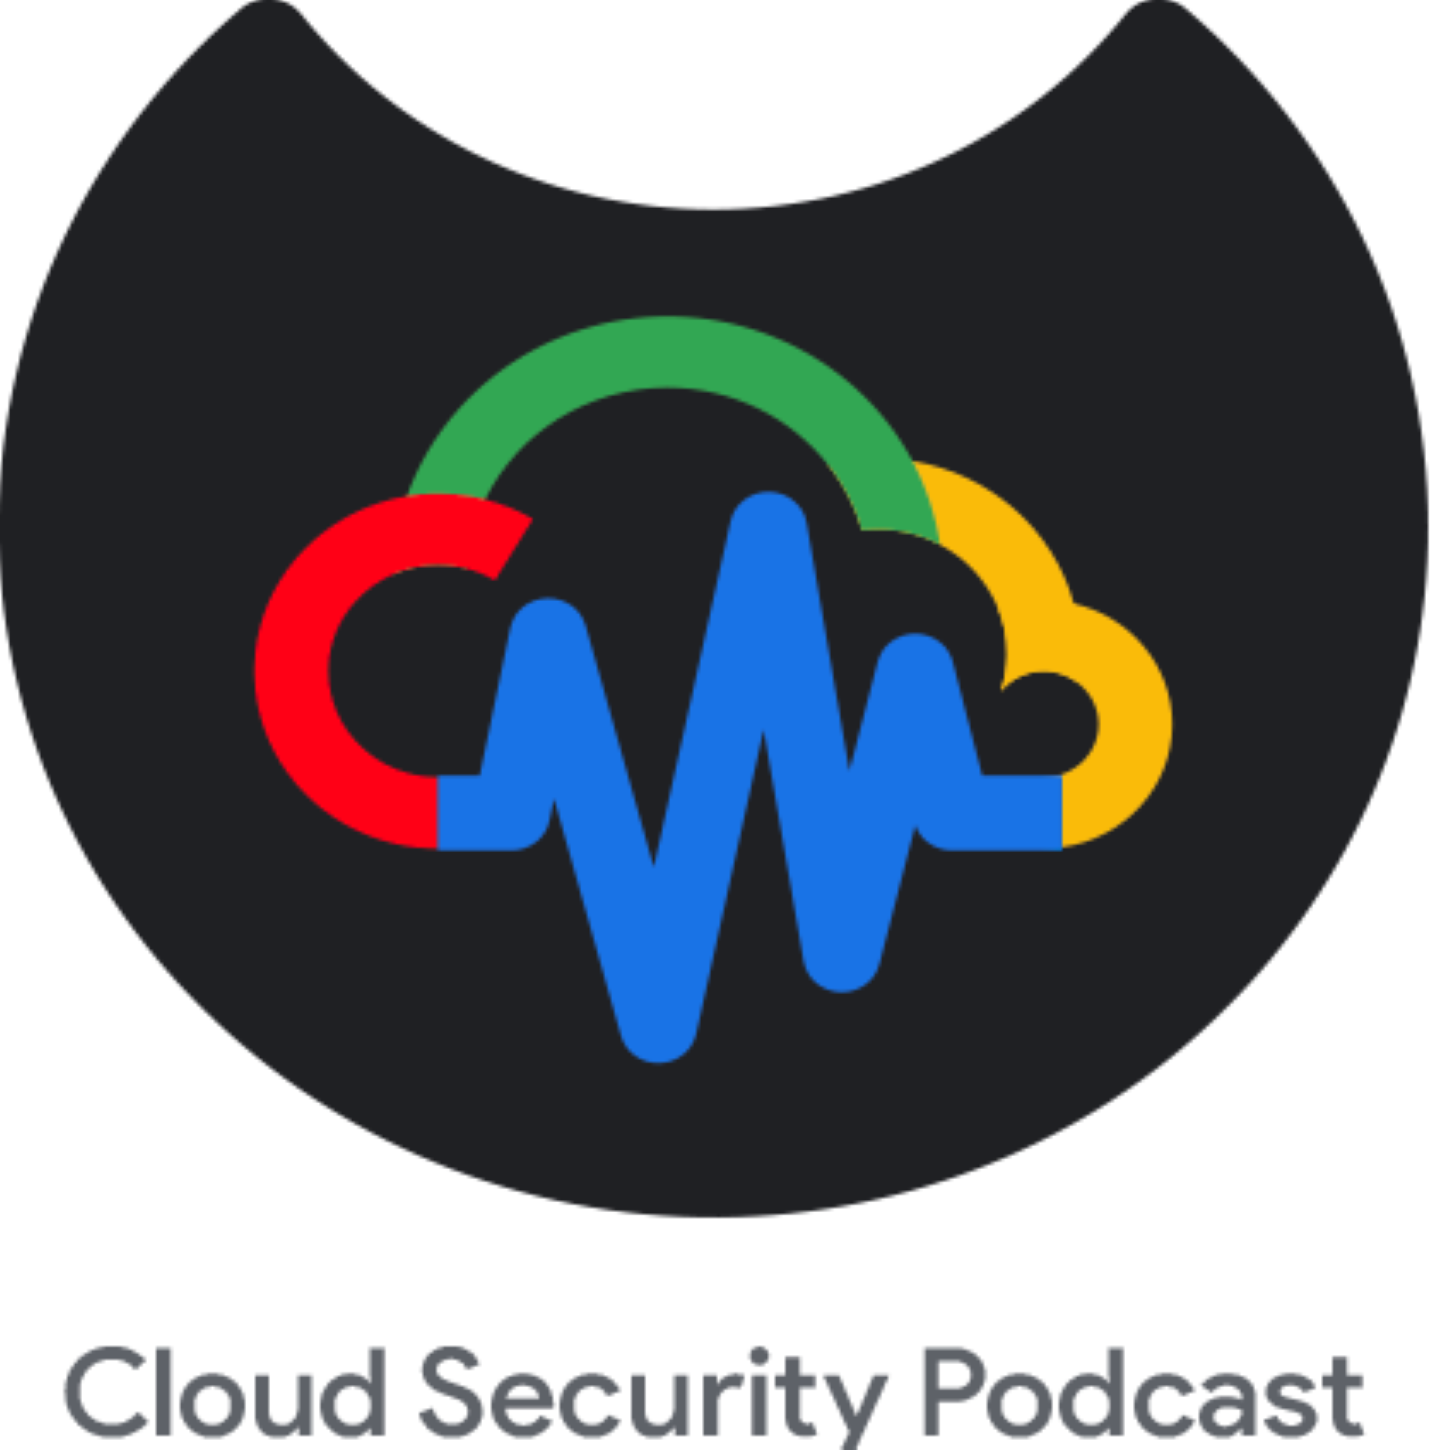 A highlight from EP144  LLMs: A Double-Edged Sword for Cloud Security? Weighing the Benefits and Risks of Large Language Models